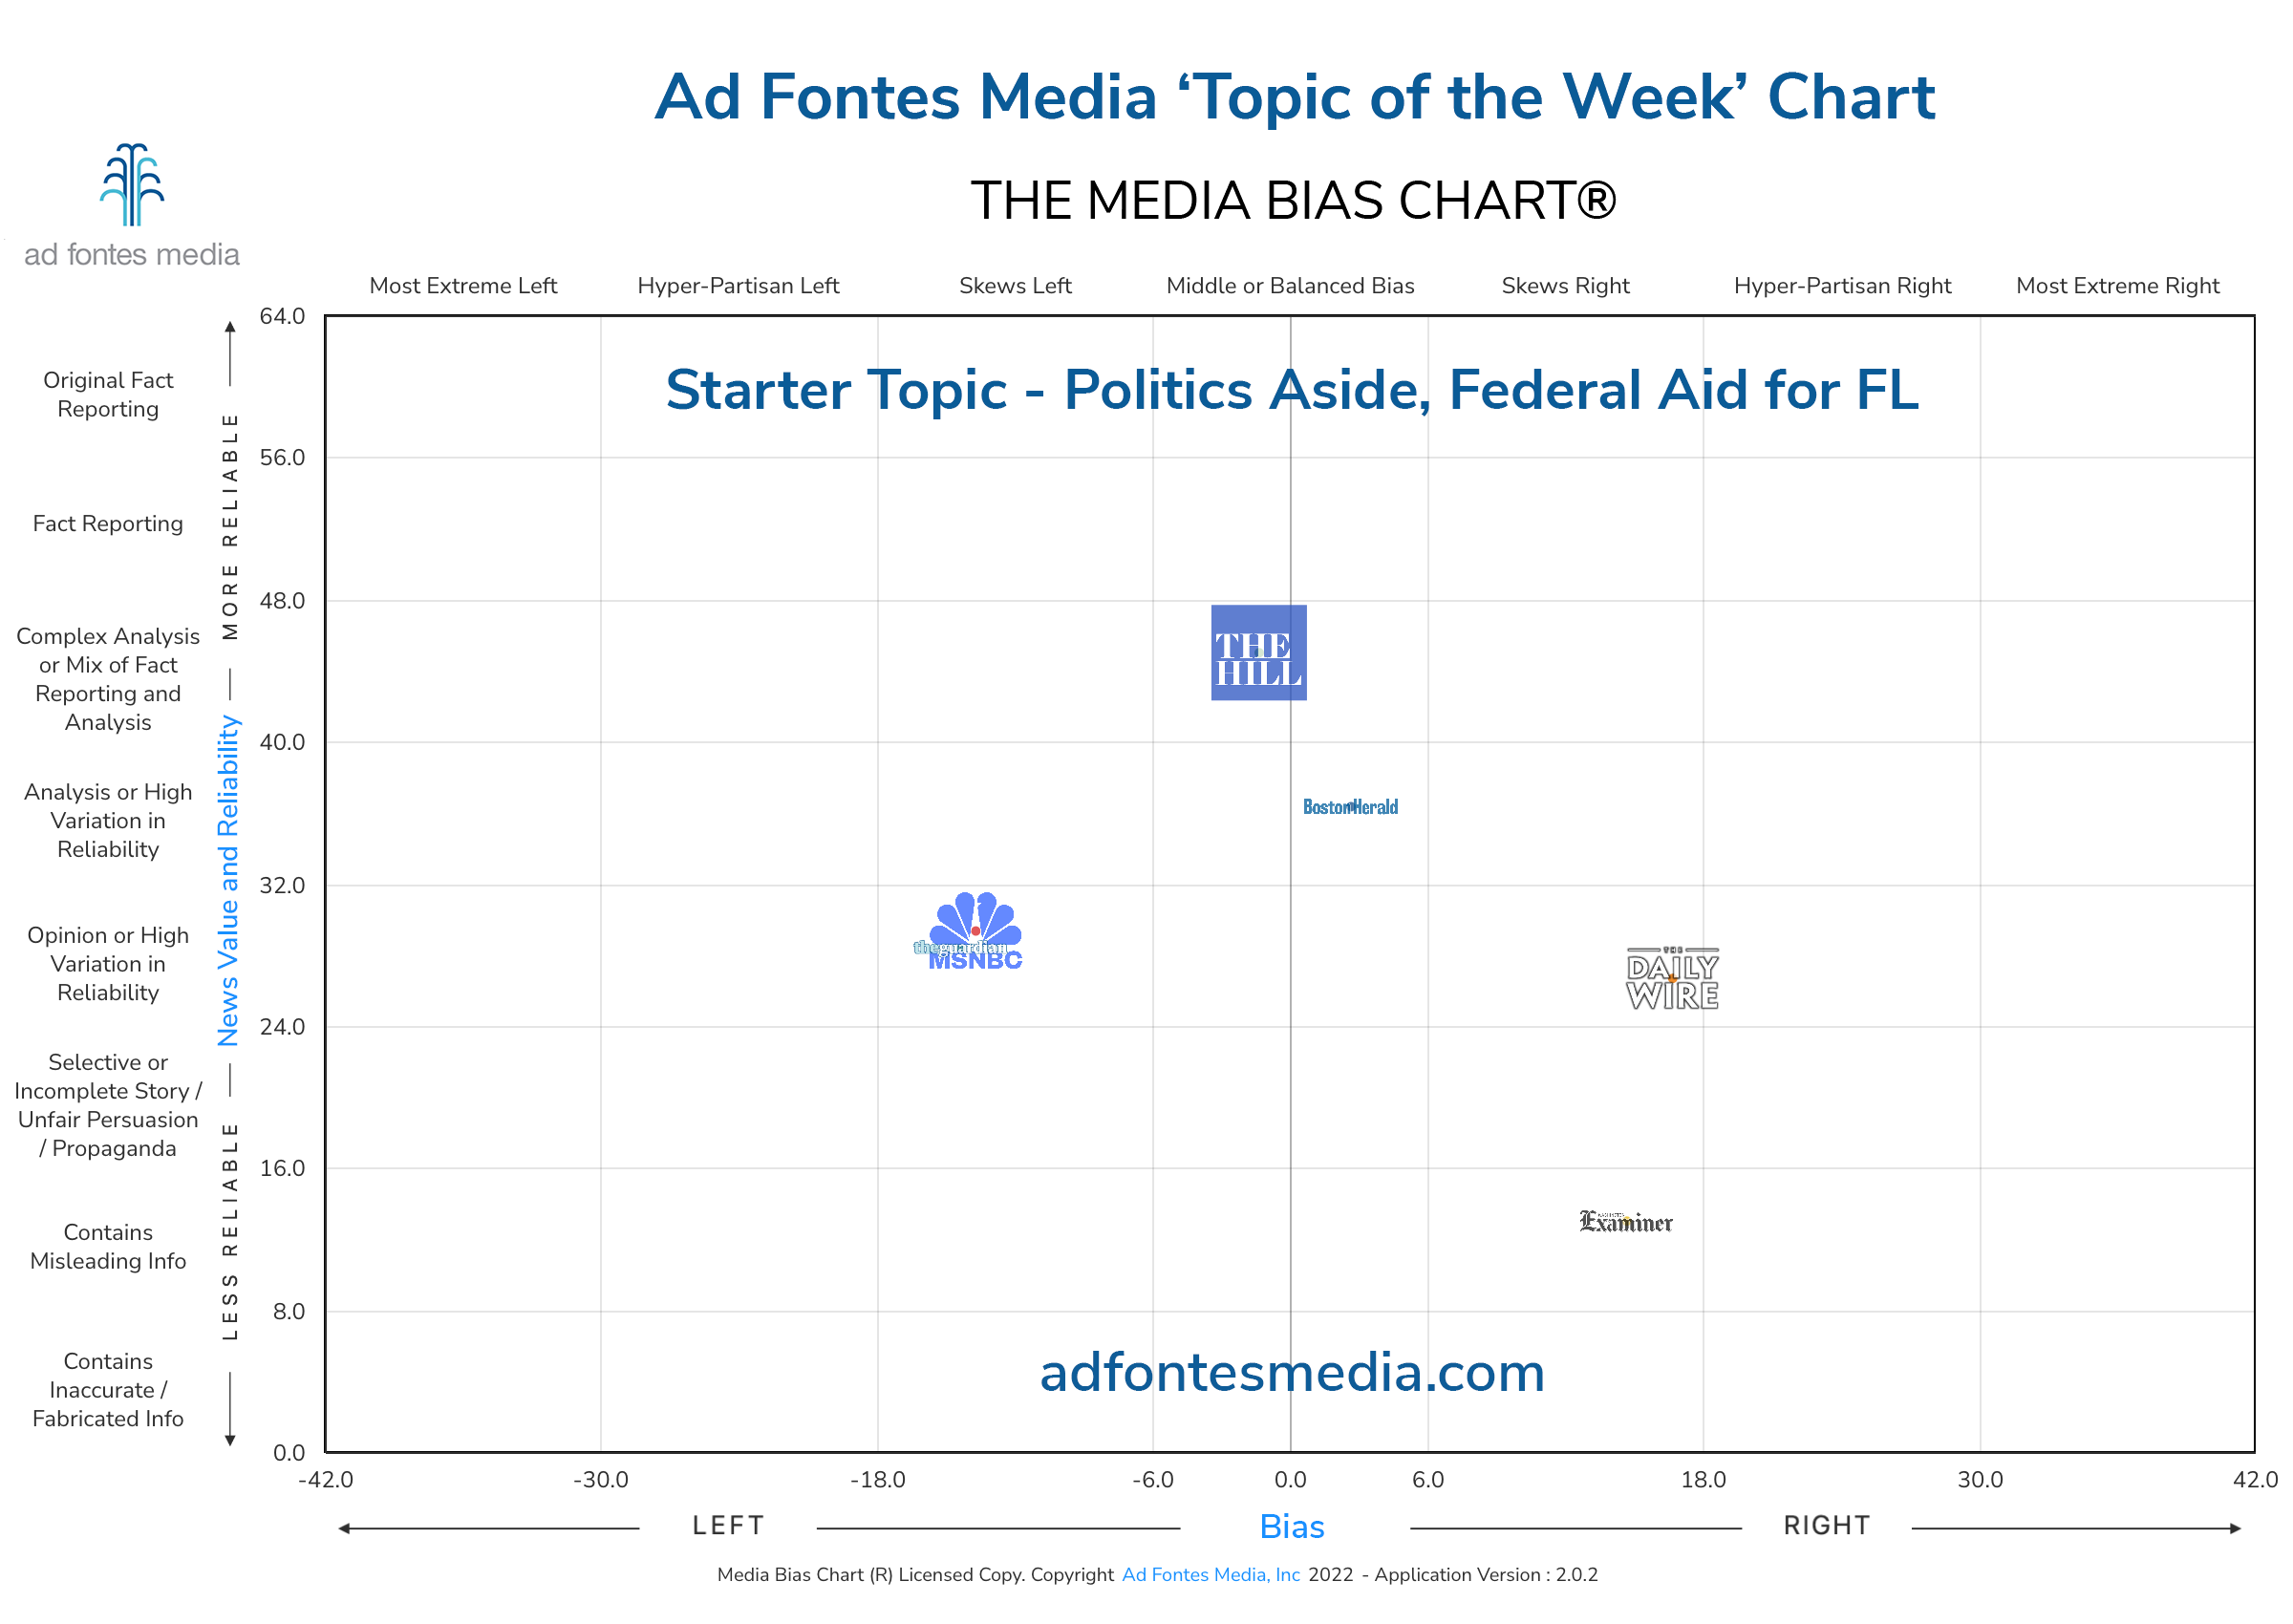 Scores for the Politics Aside, Federal Aid for FL articles on the chart